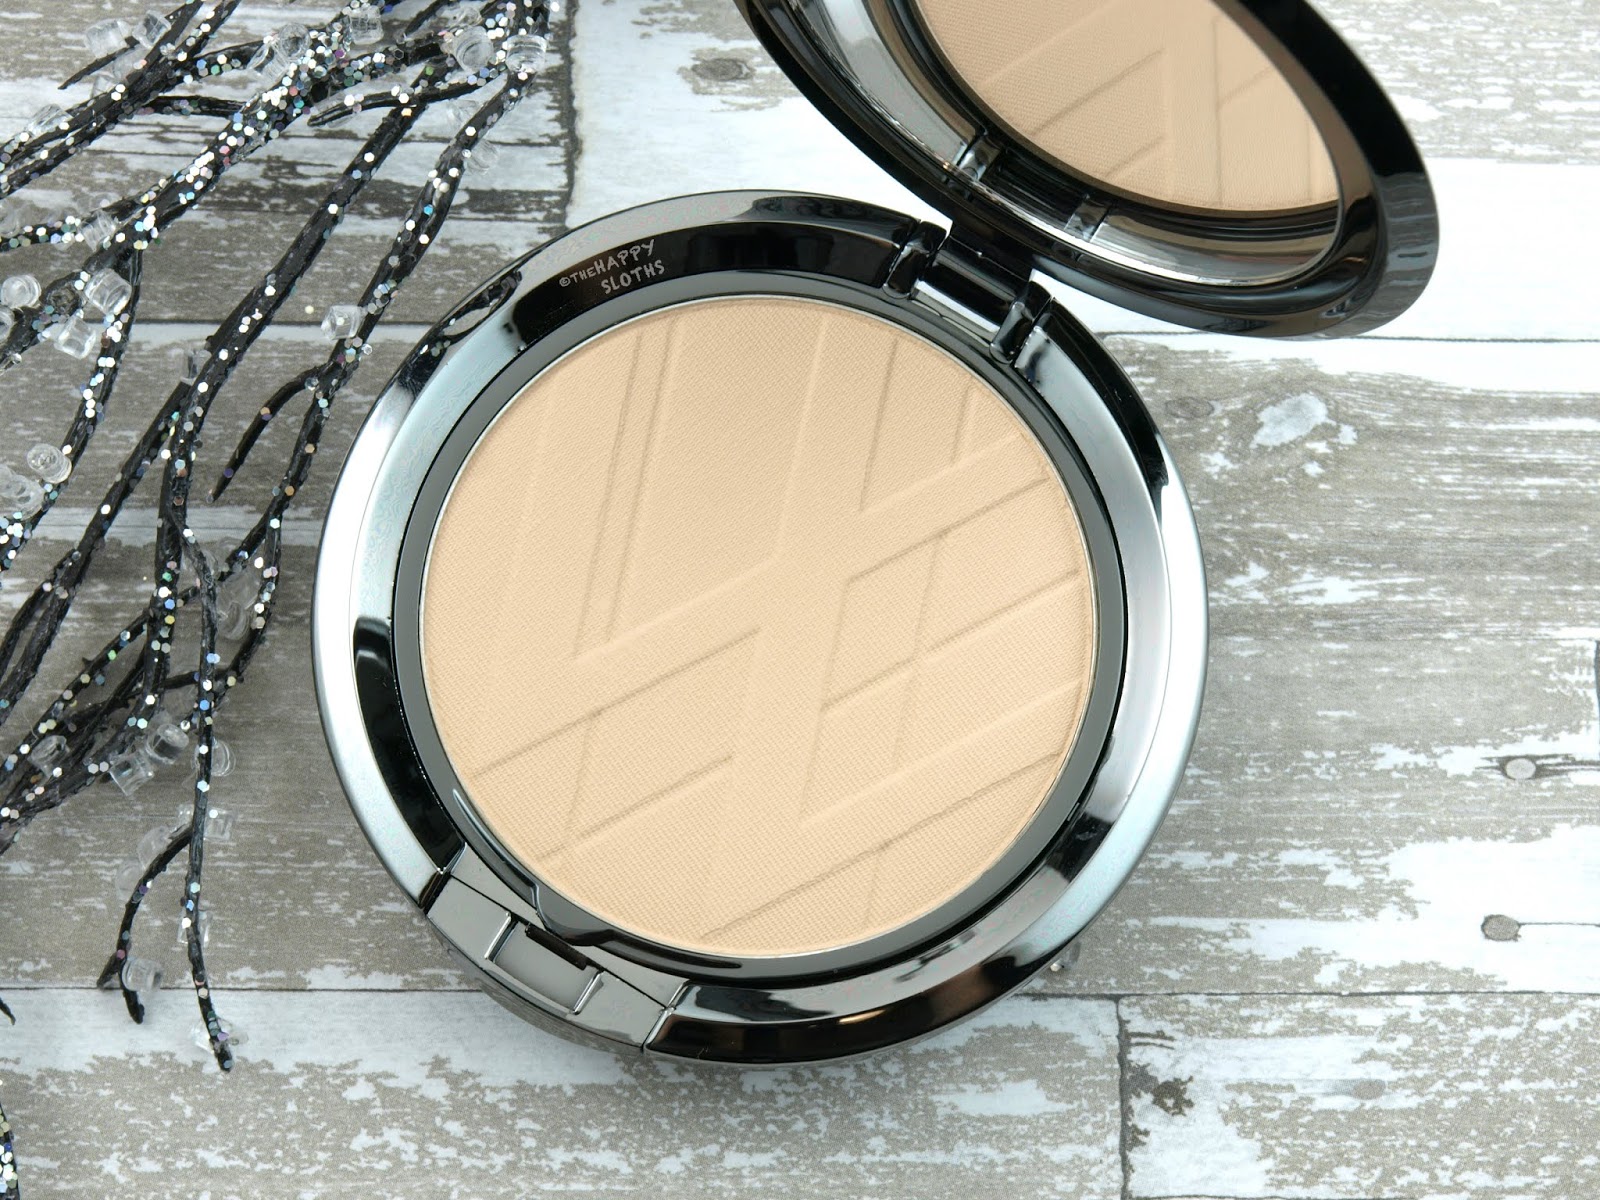 Lise Watier | Teint Multi-Fini Compact Foundation in "Ivory": Review and Swatches